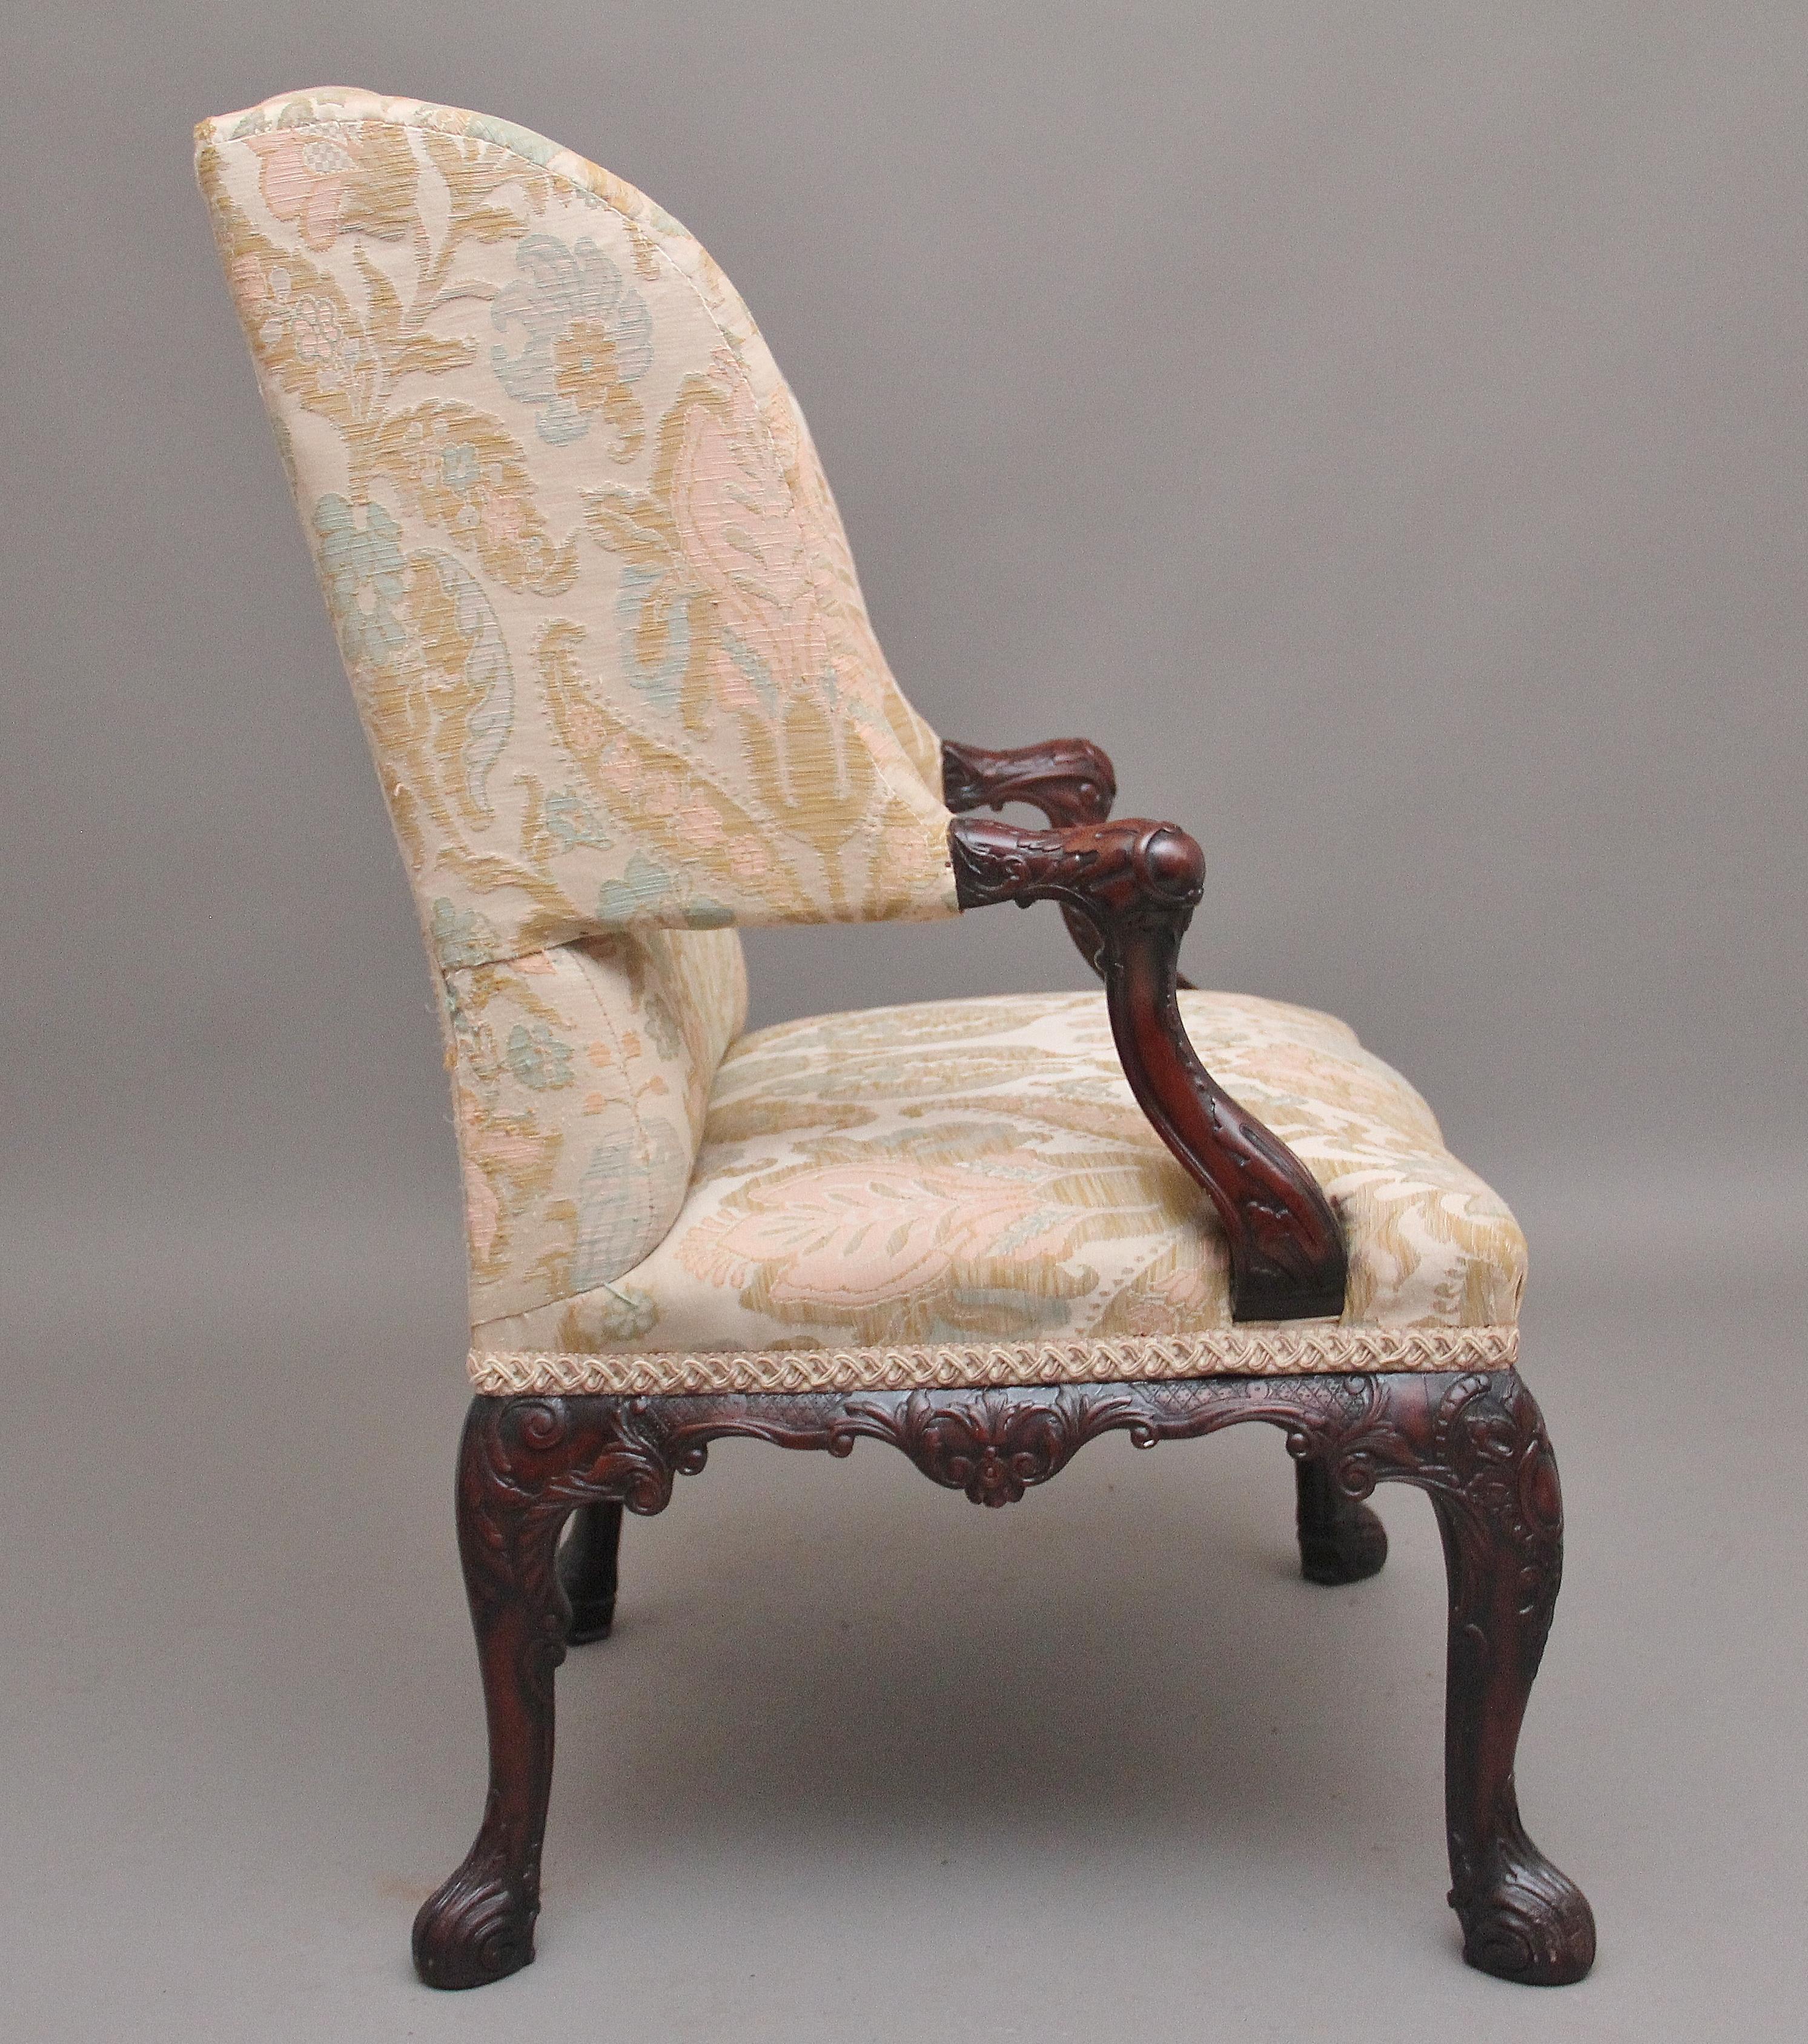 19th Century carved mahogany library armchair in the Chippendale style, upholstered in a cream fabric with a decorative floral pattern, high shaped back with a large cushioned seat, nice shaped arm supports, lovely carved mahogany frame